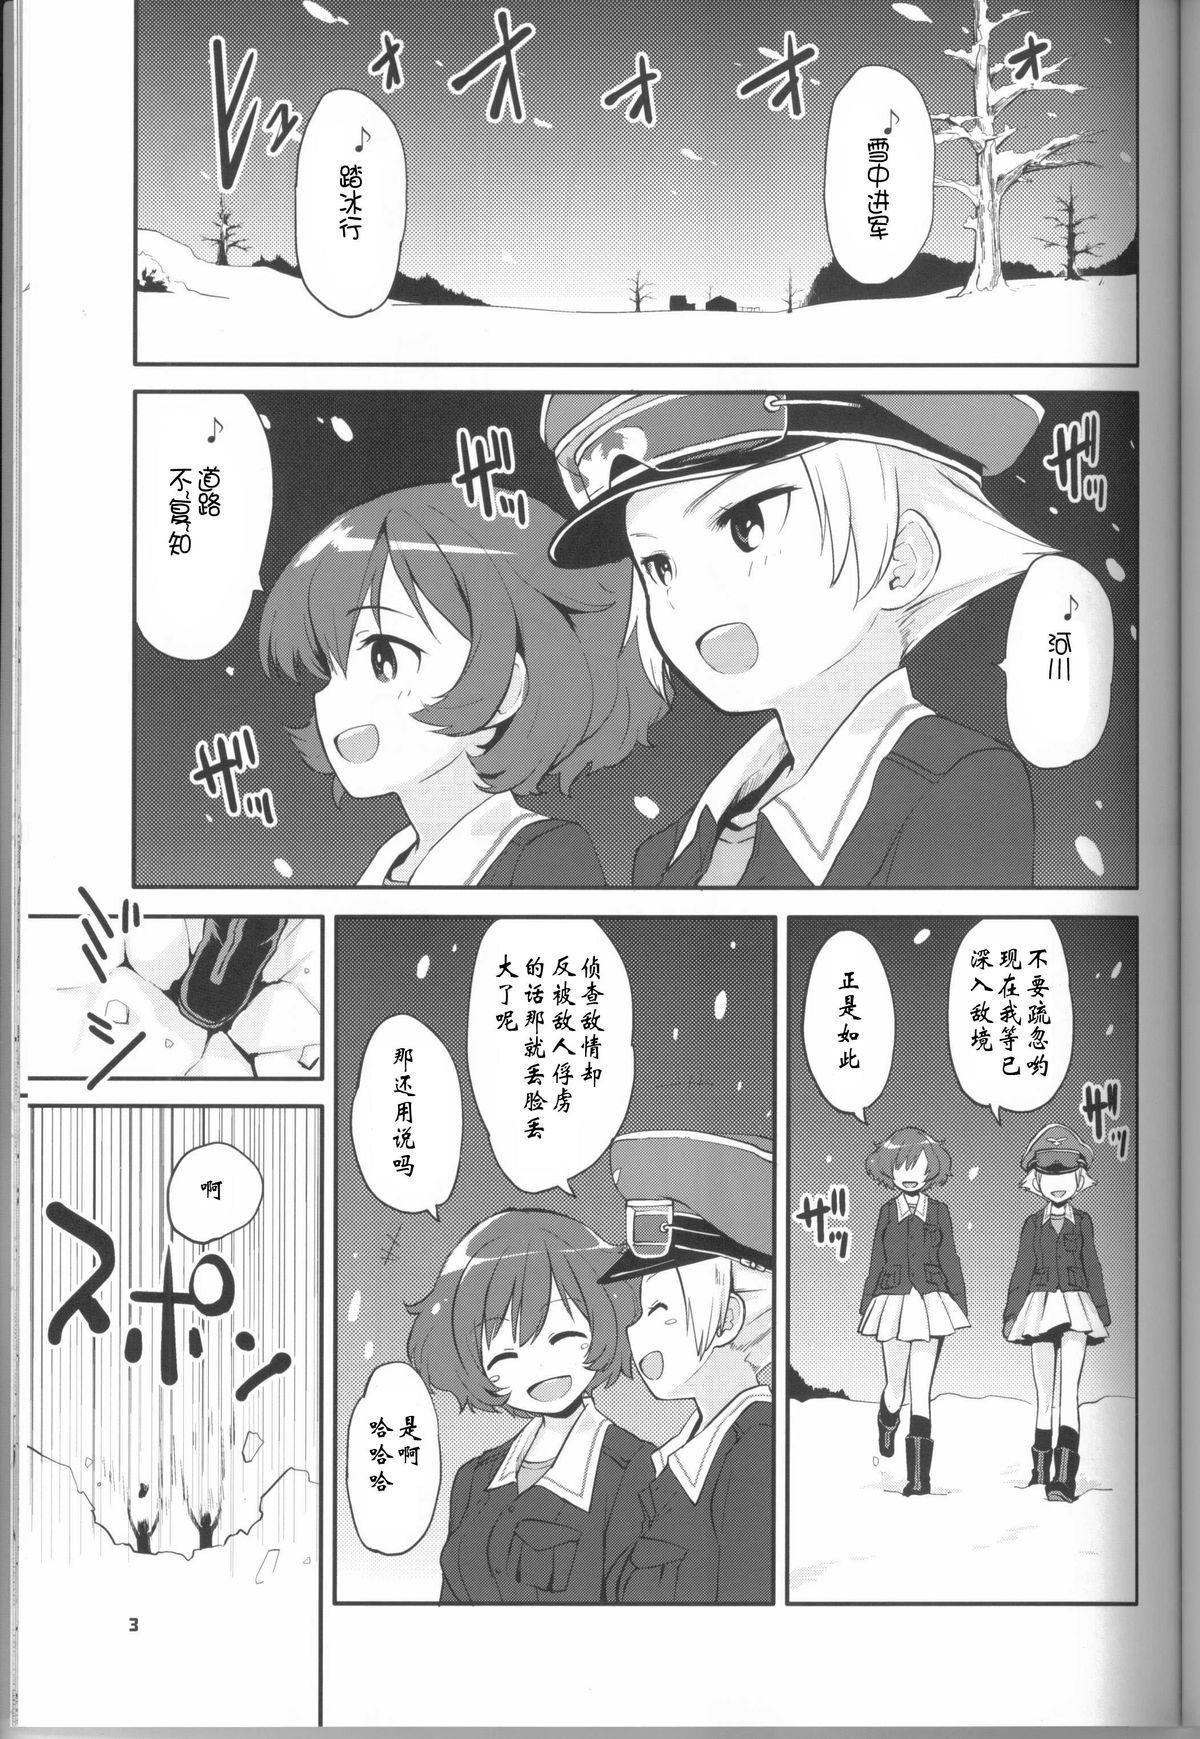 Flogging The General Frost Has Come! - Girls und panzer Jockstrap - Page 2